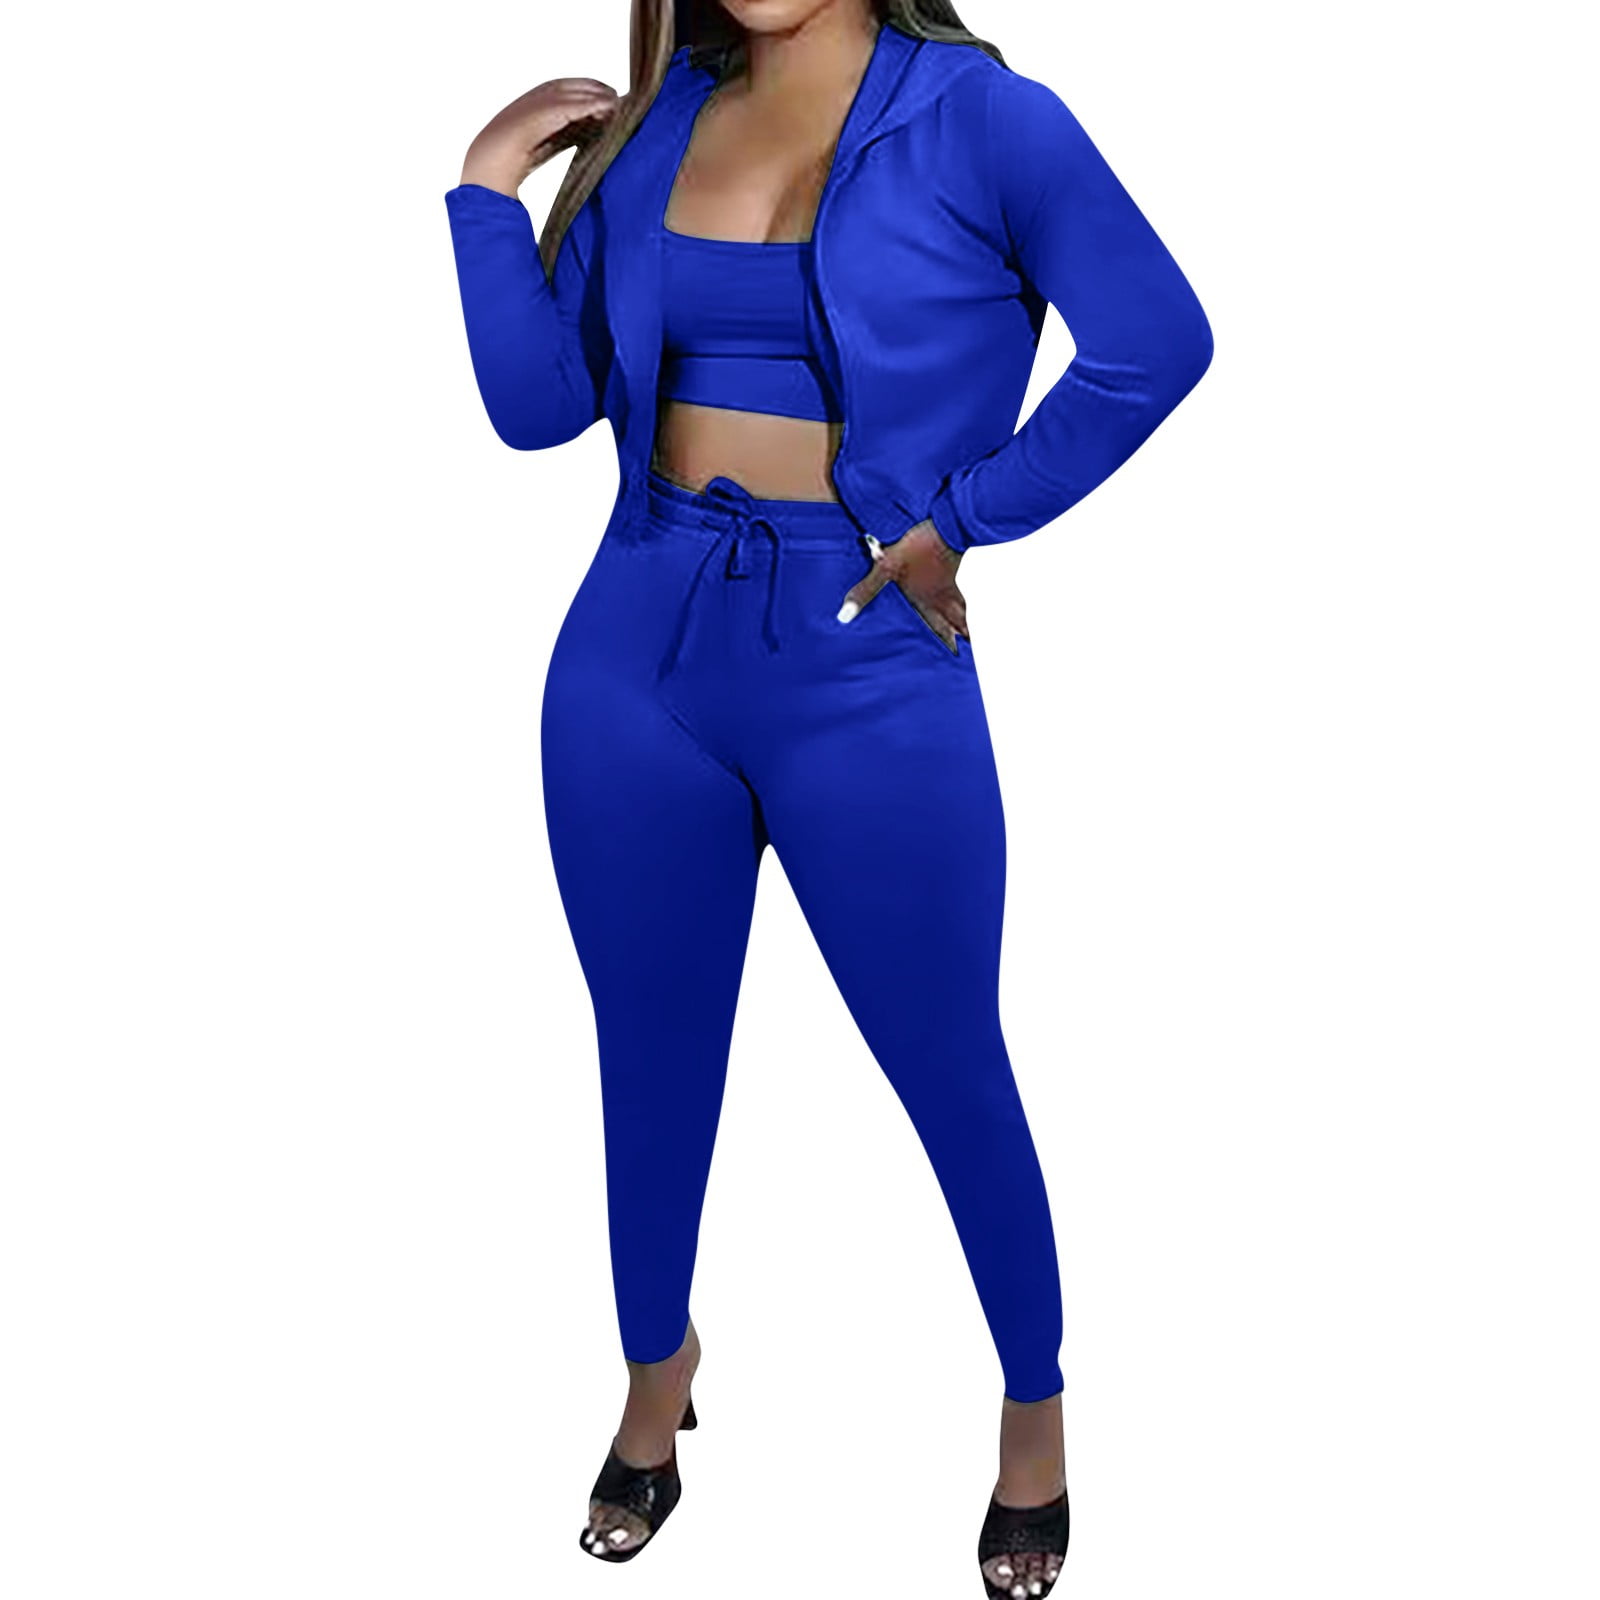 PMUYBHF Women Two Piece Outfits Sets Clubwear Two Piece Outfits Women  Wedding Ladies Plus Size Seamless Bodysuit Thong Pants Corset Jumpsuit  Track